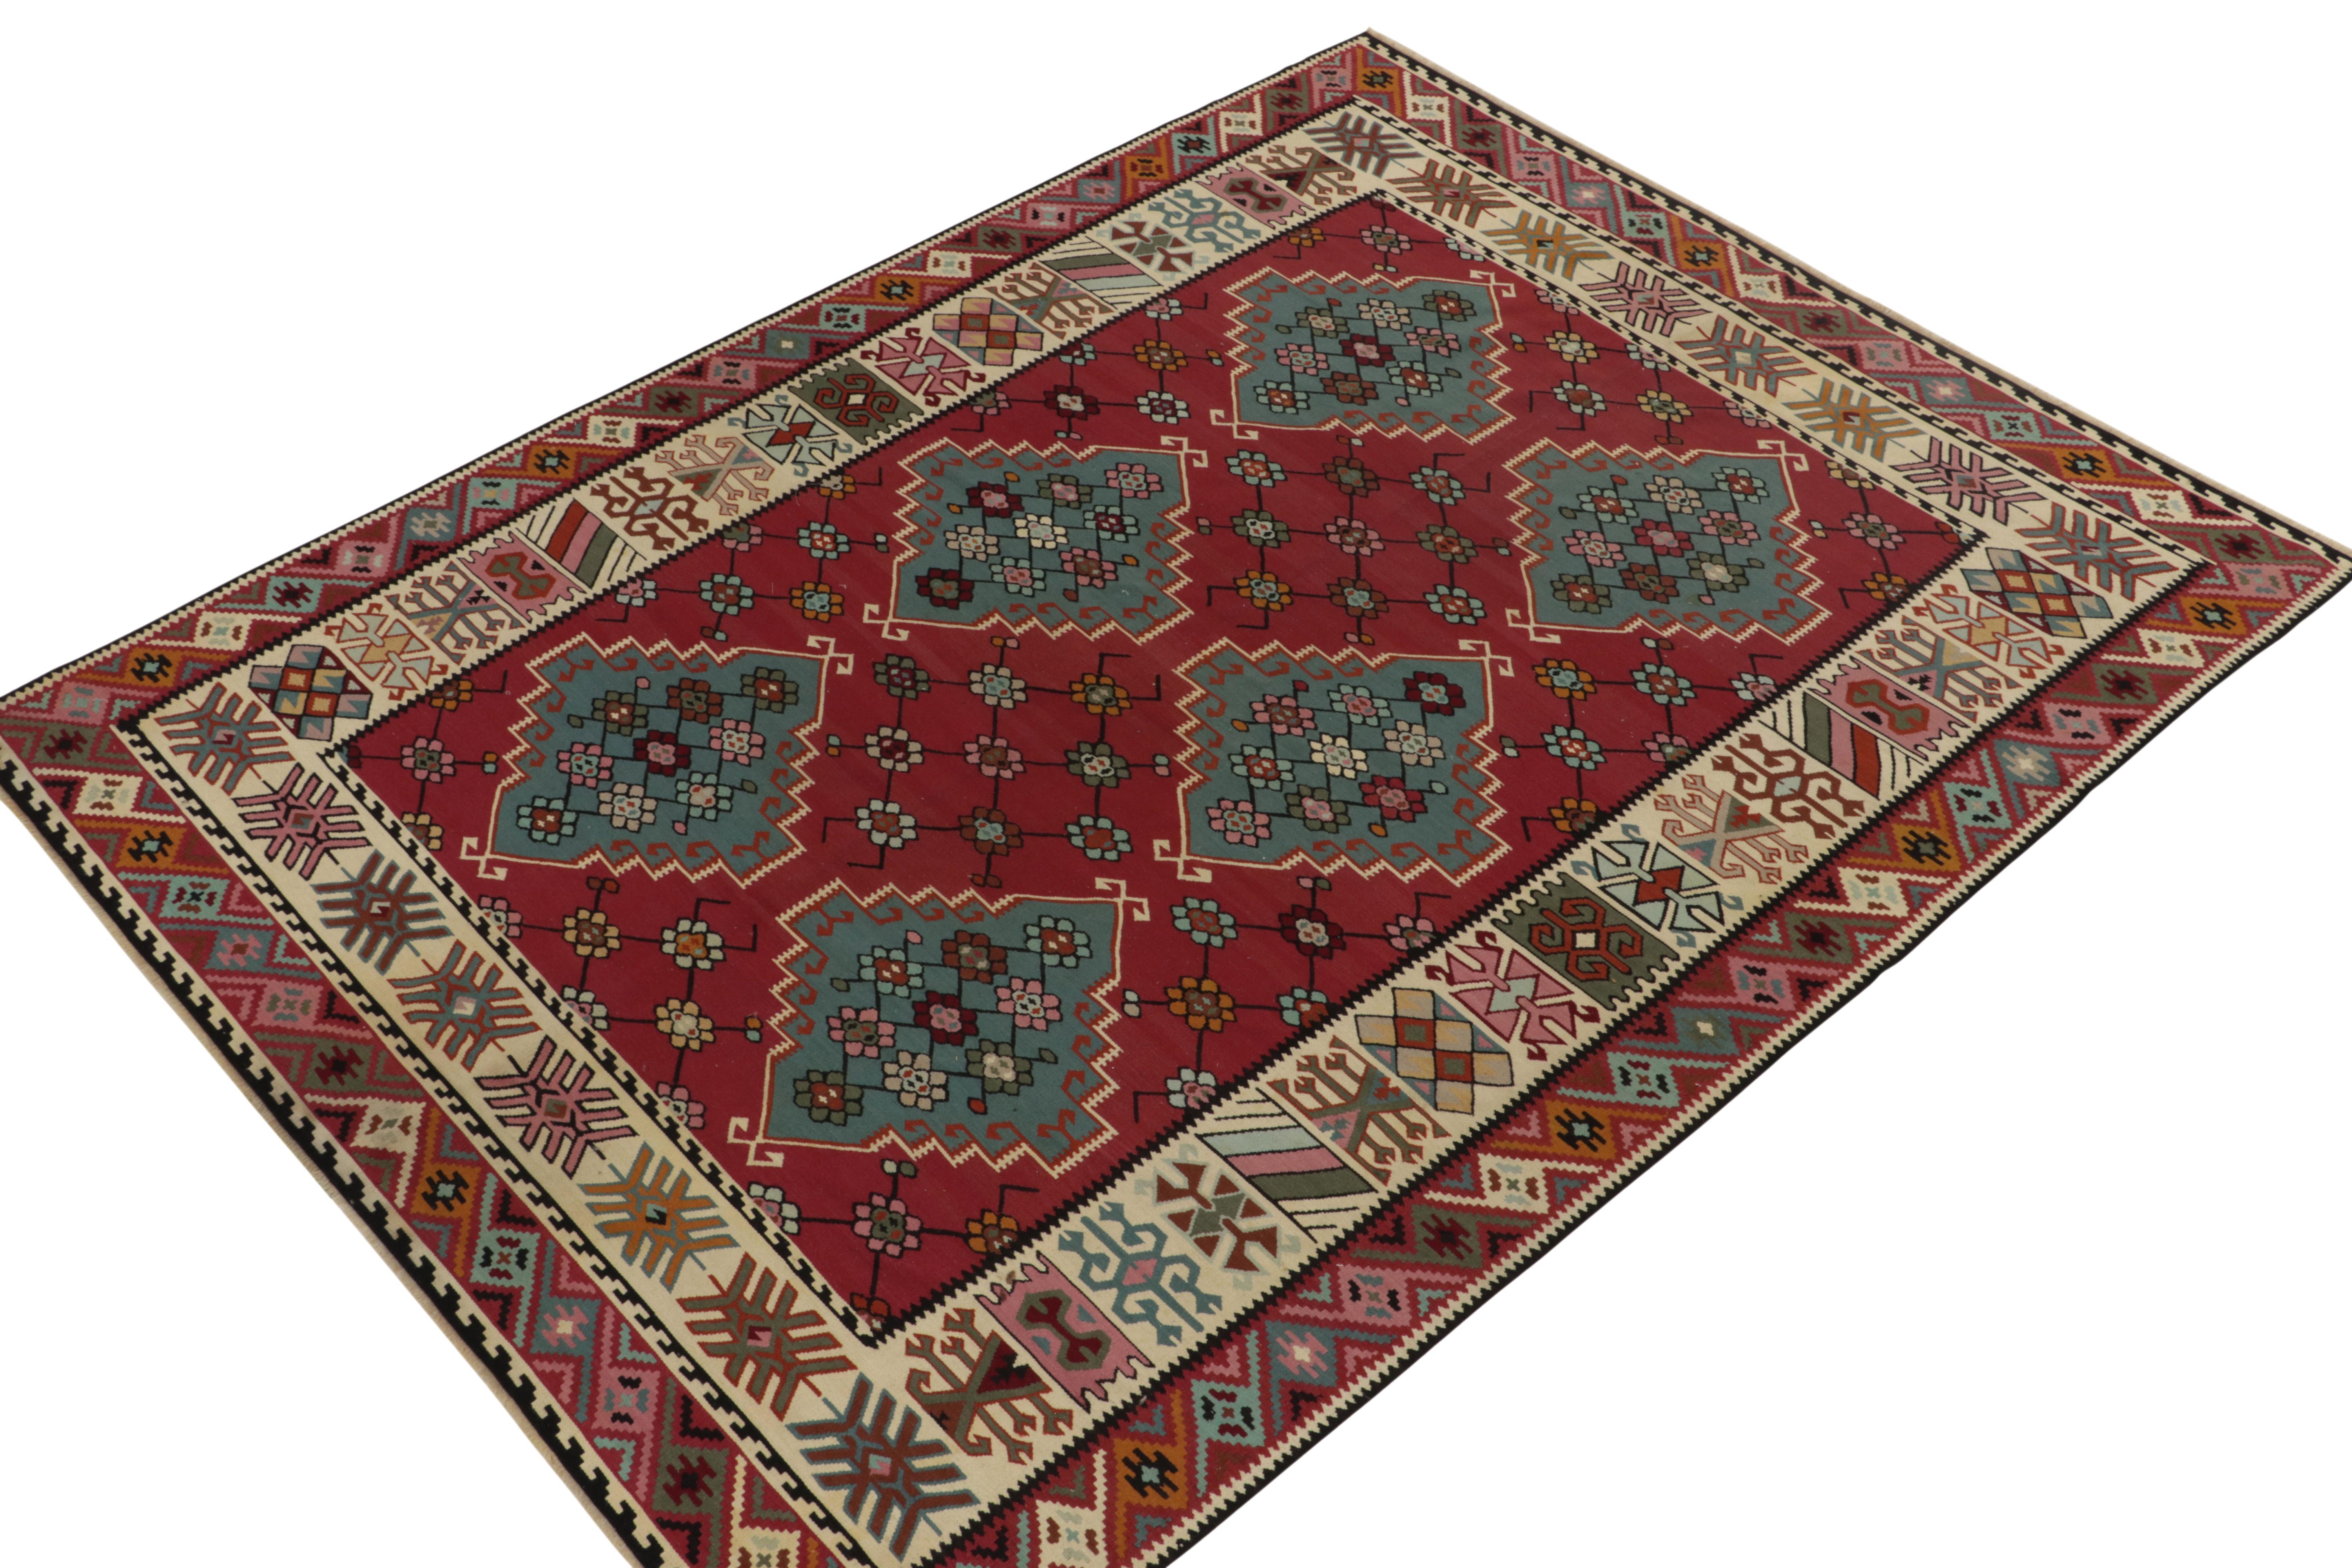 Handwoven in wool, this antique Kilim is the latest unveiled from R&K Principal Josh Nazmiyal’s coveted classic flat weaves. 

Handwoven in wool circa 1890-1900, this Basra-style rug features a tasteful marriage of oriental influences in its pattern